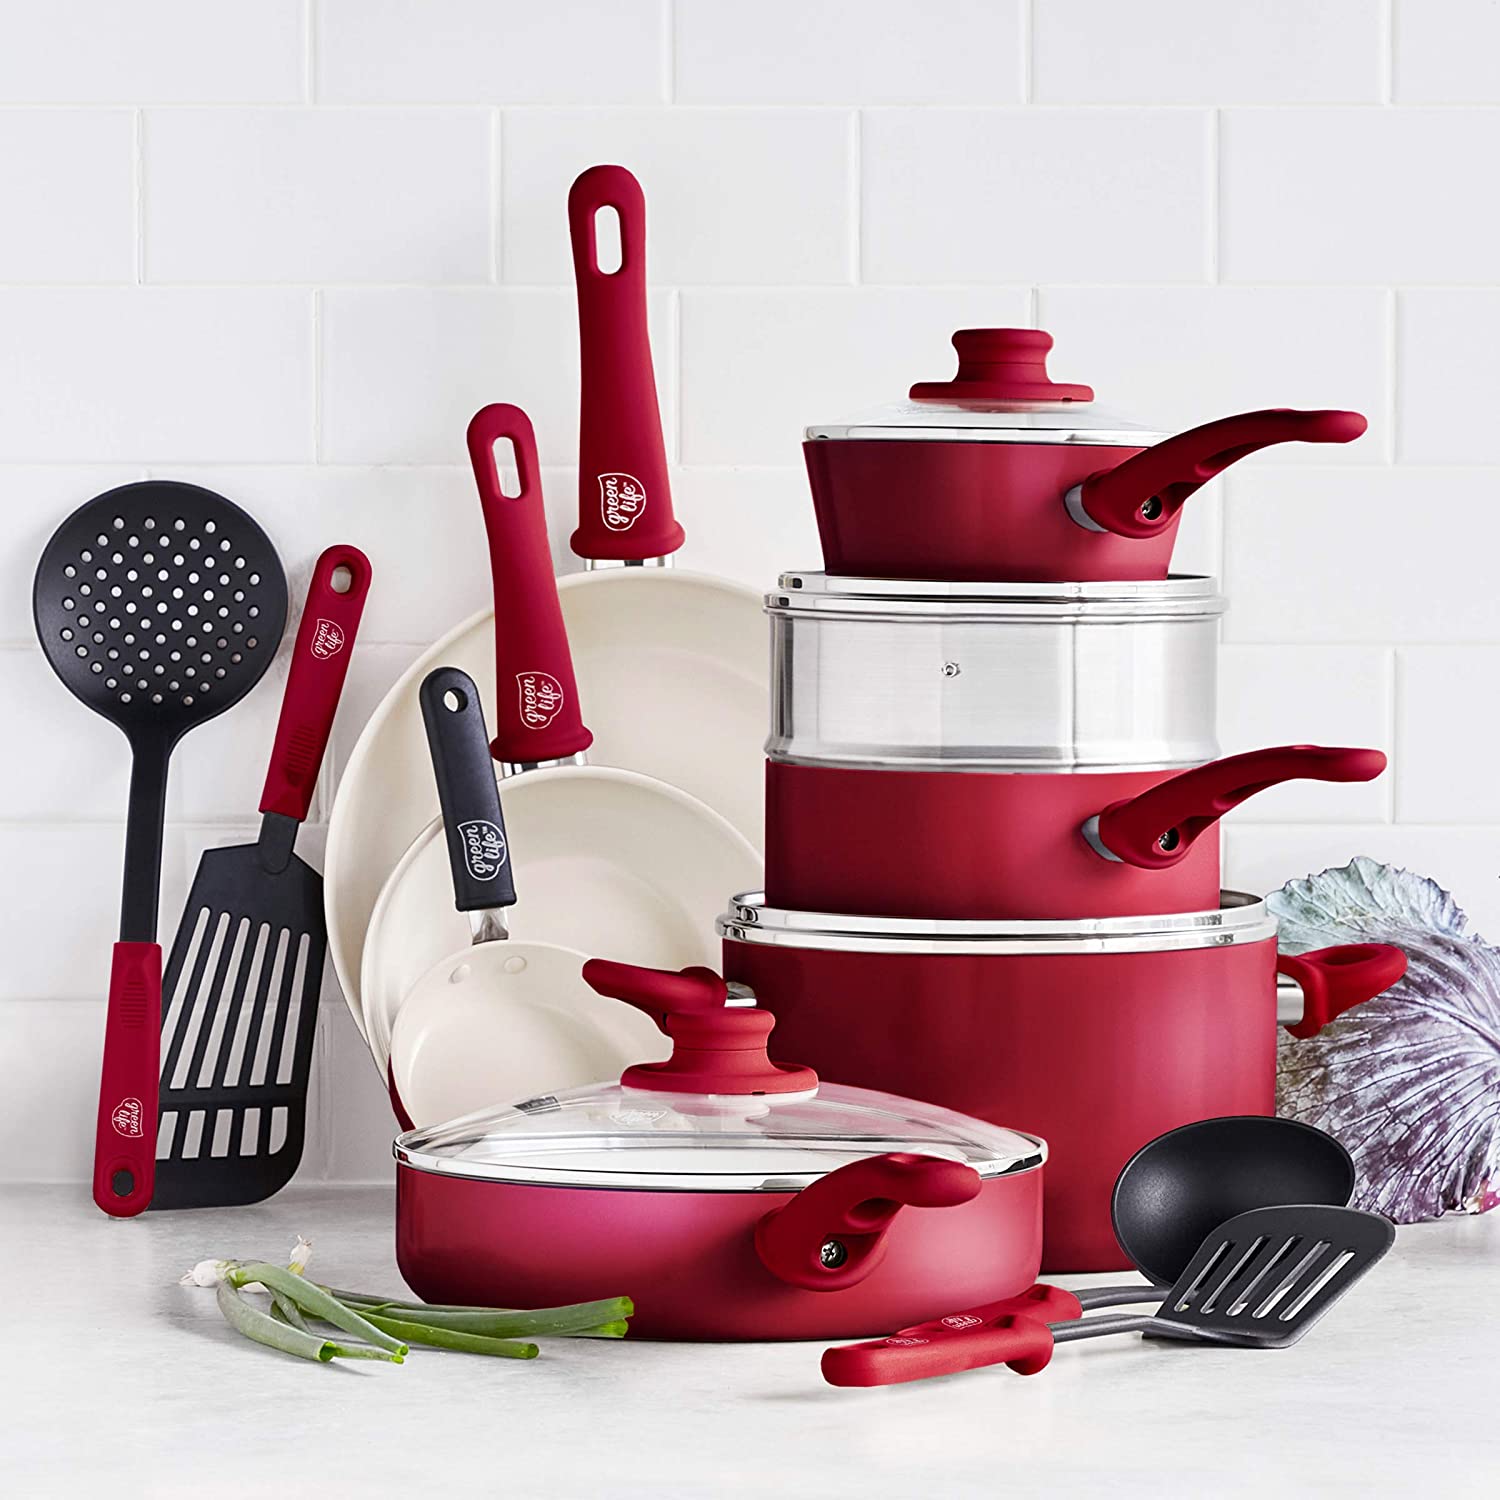 Which is the best Cookware